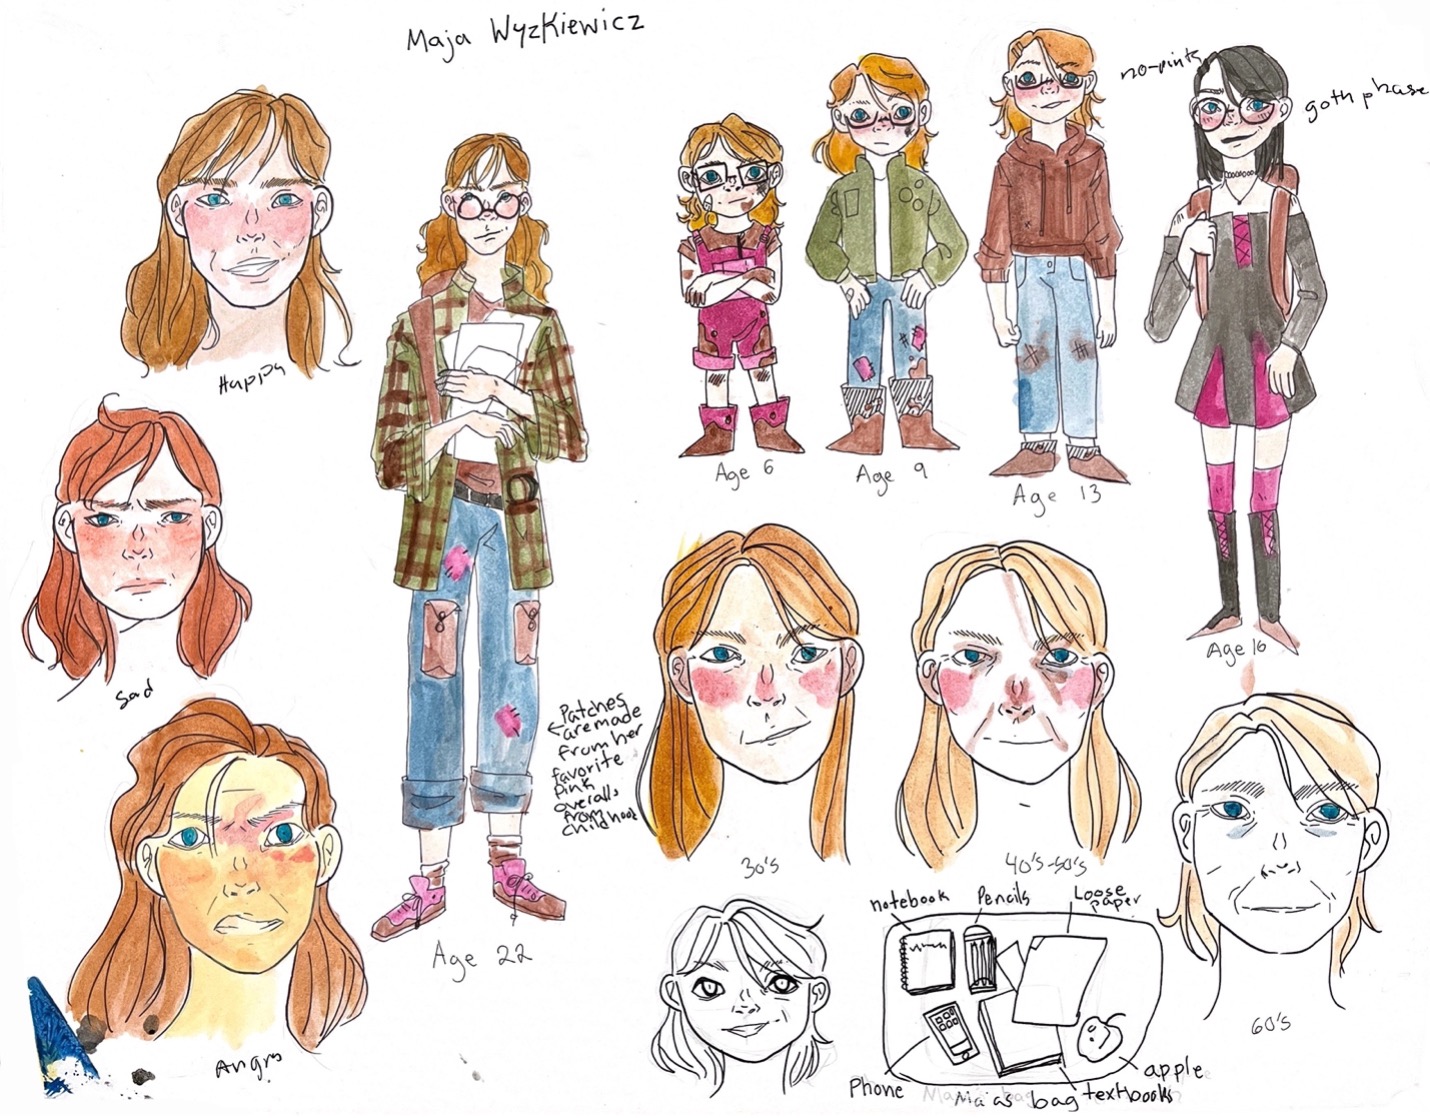 page from a student's visual diary that includes drawings of the same person at different ages and life stages